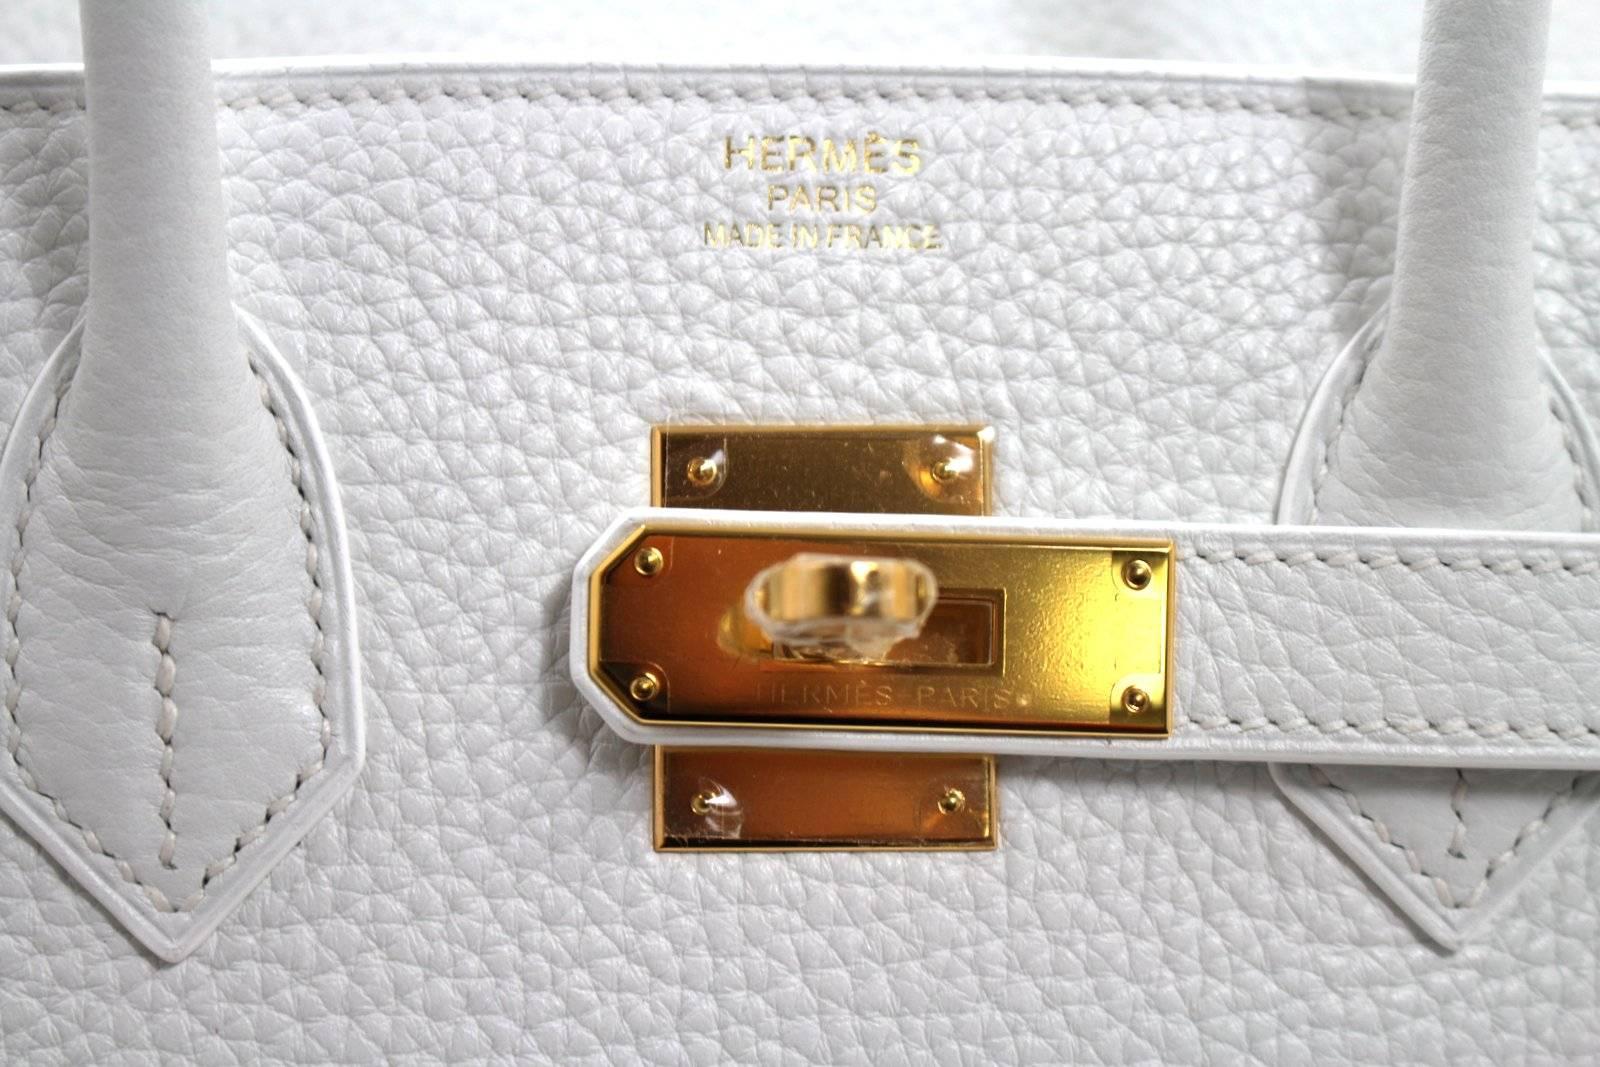 Hermès WHITE Clemence Birkin Bag- 35 cm with GHW, T stamp For Sale 1